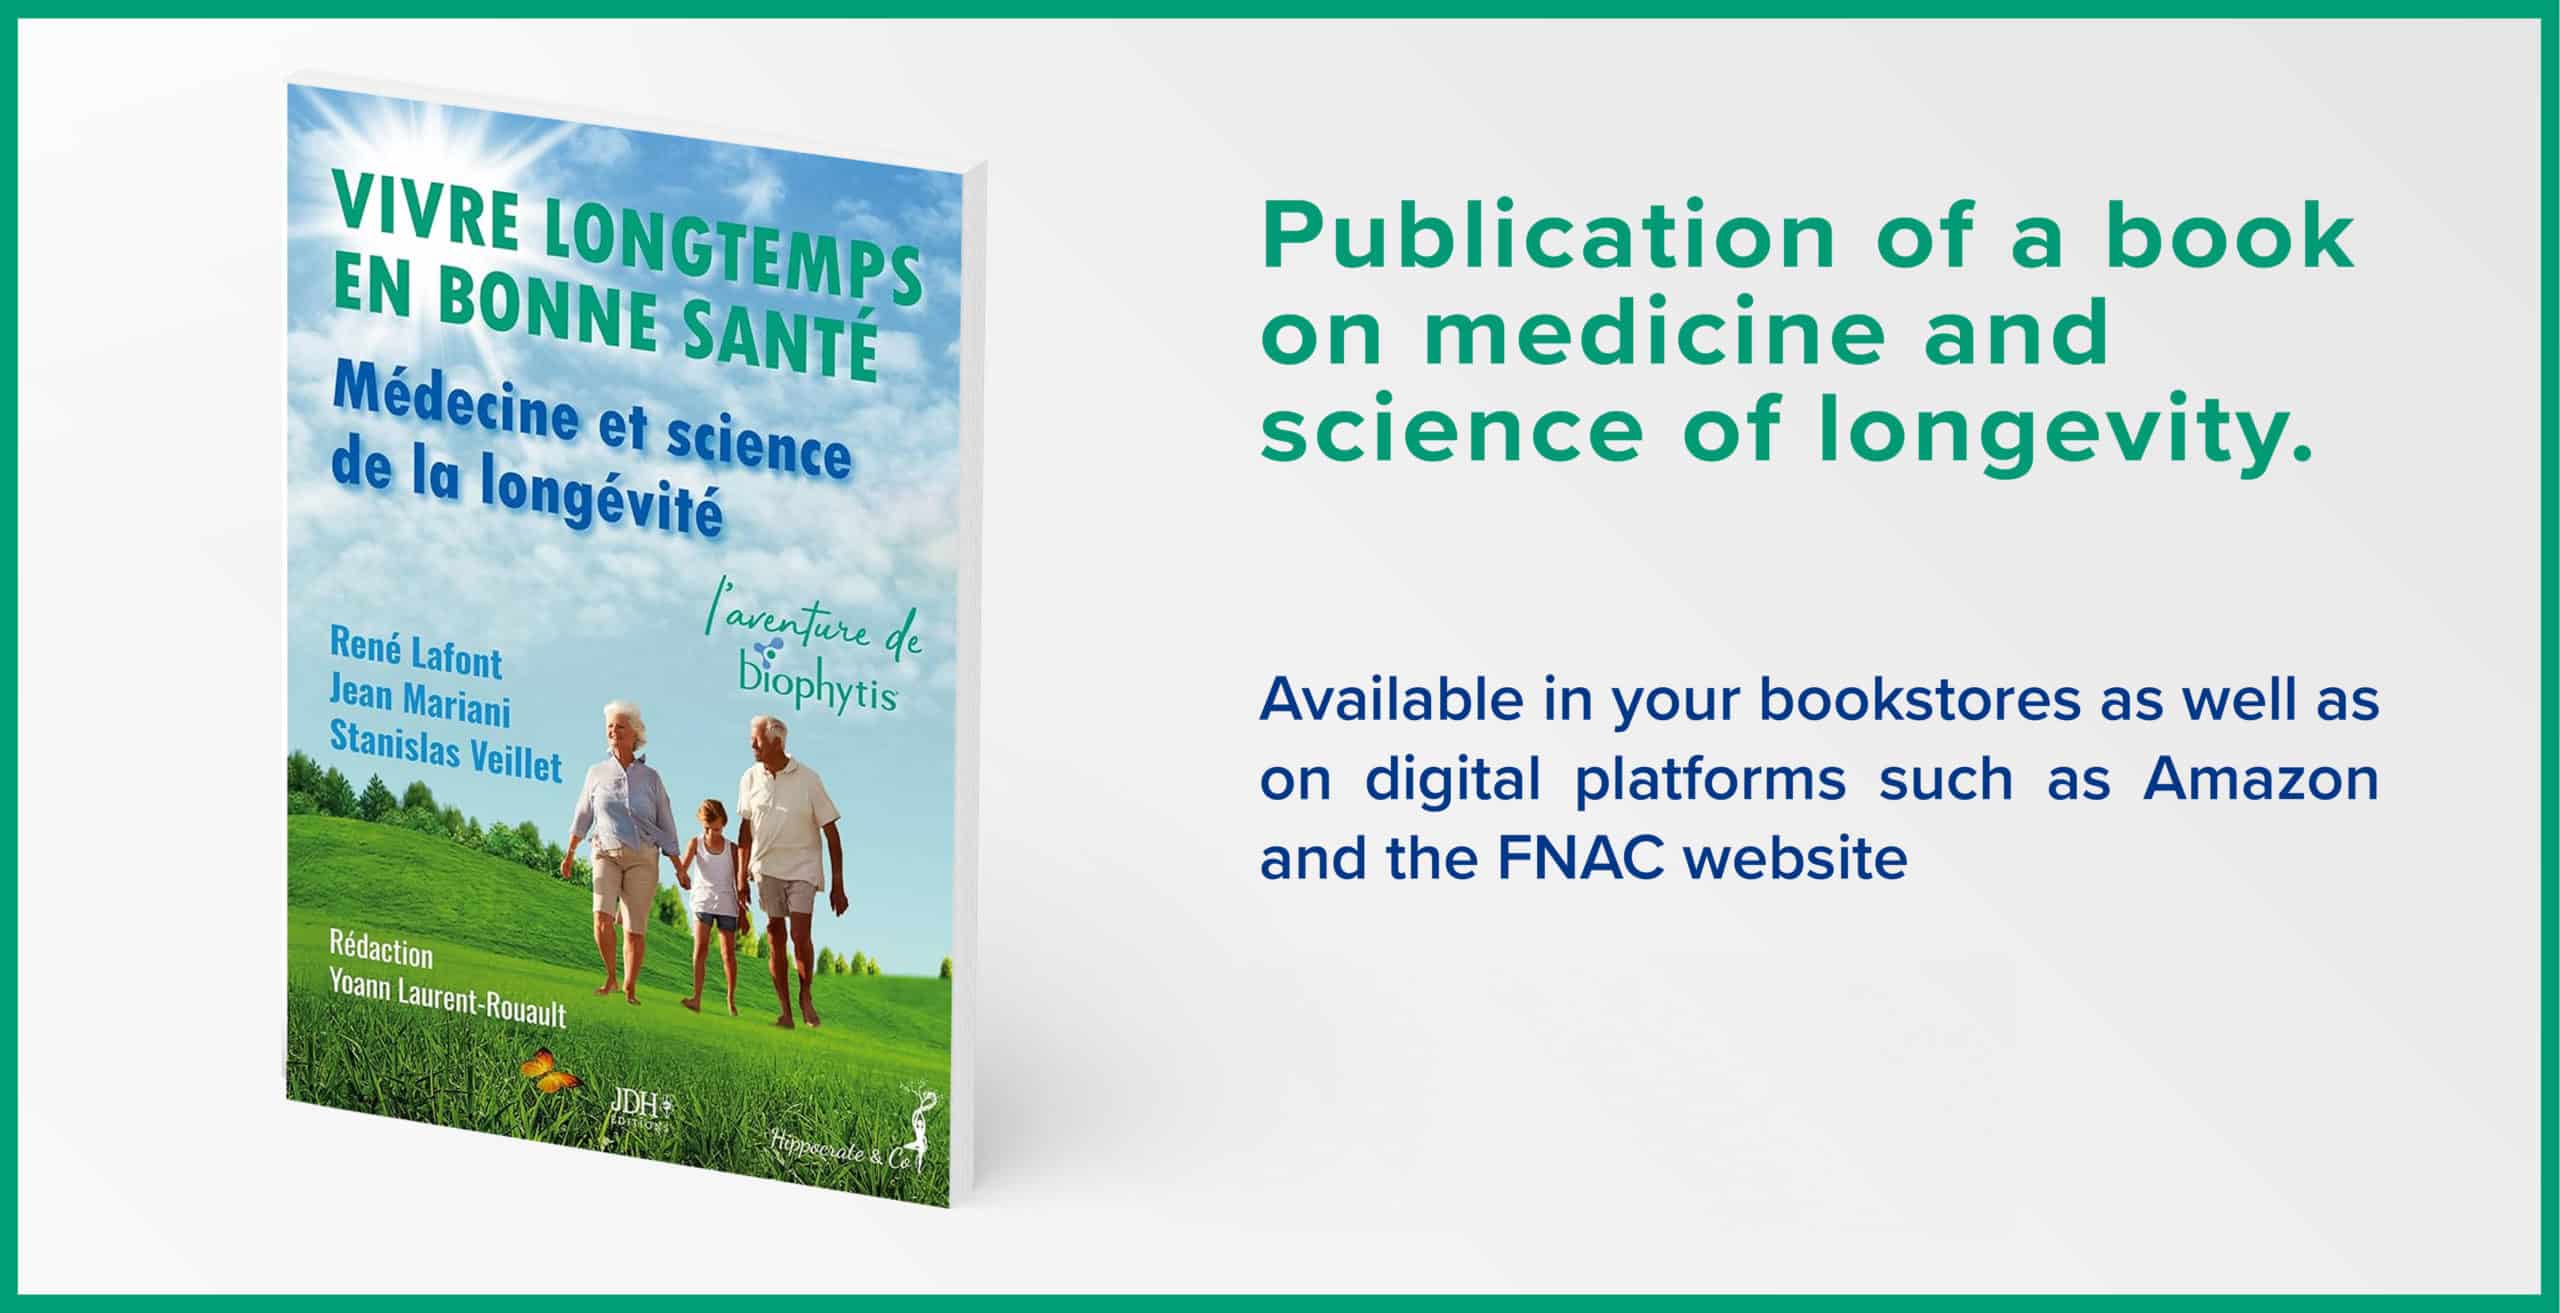 "Live healthier longer" – Publication of a book on the medicine and science of longevity